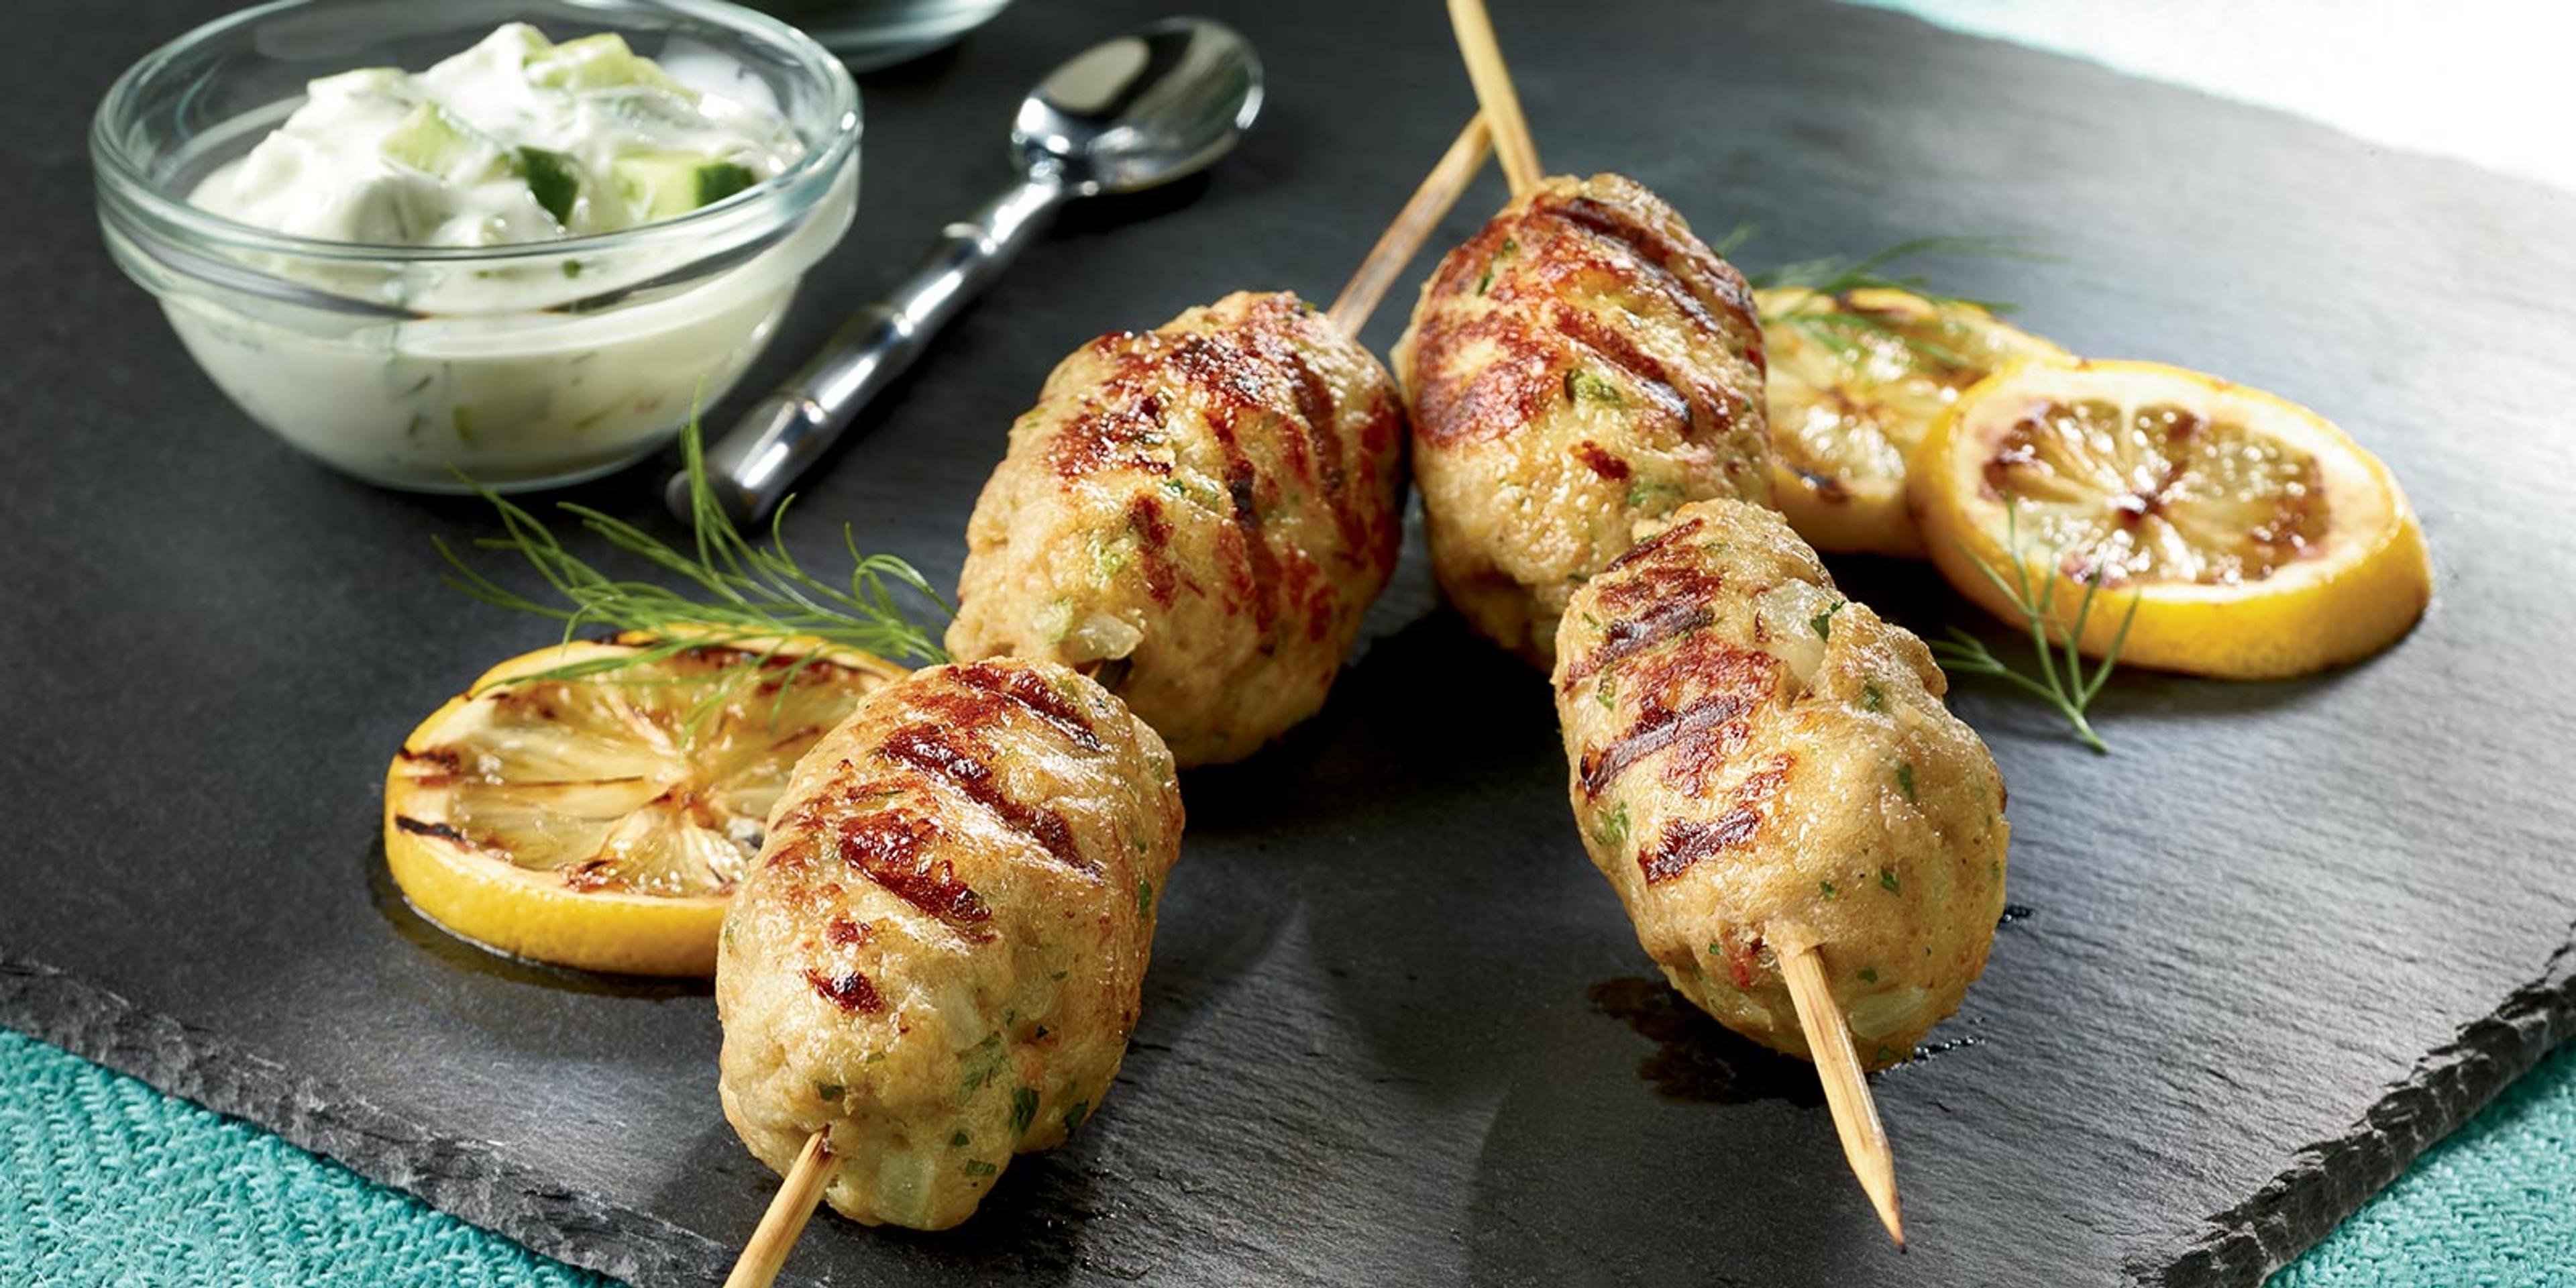 These healthy grilled chicken kabobs are a great source of lean protein, and organic means no antibiotics, toxic pesticides or synthetic hormones too!